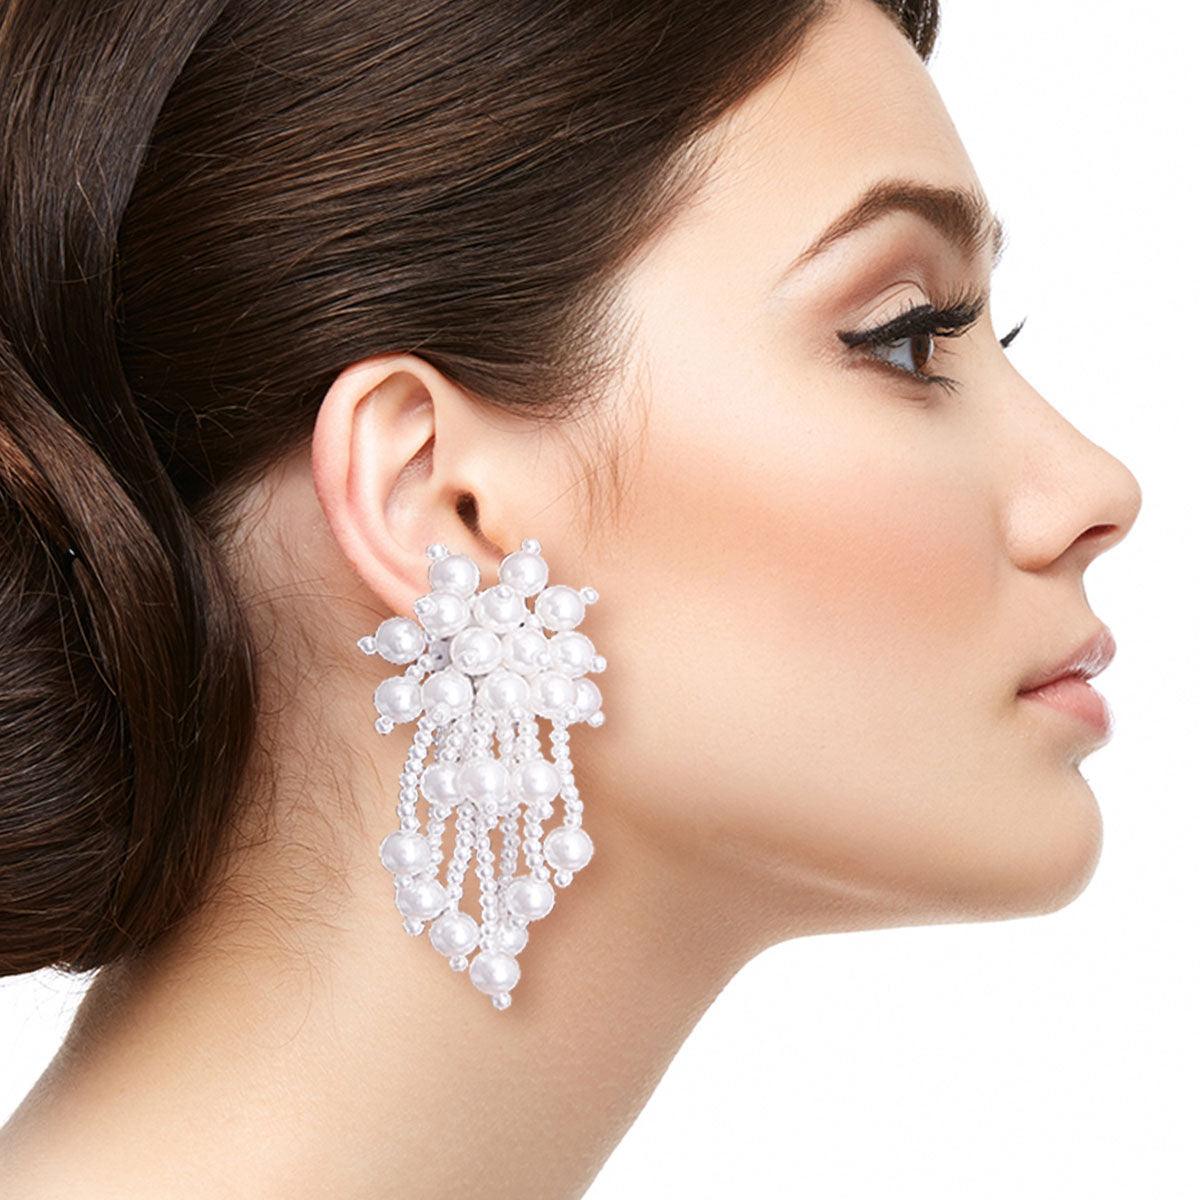 Elegant White Pearl Cluster Drop Earrings - Stand Out in Style & Sophistication